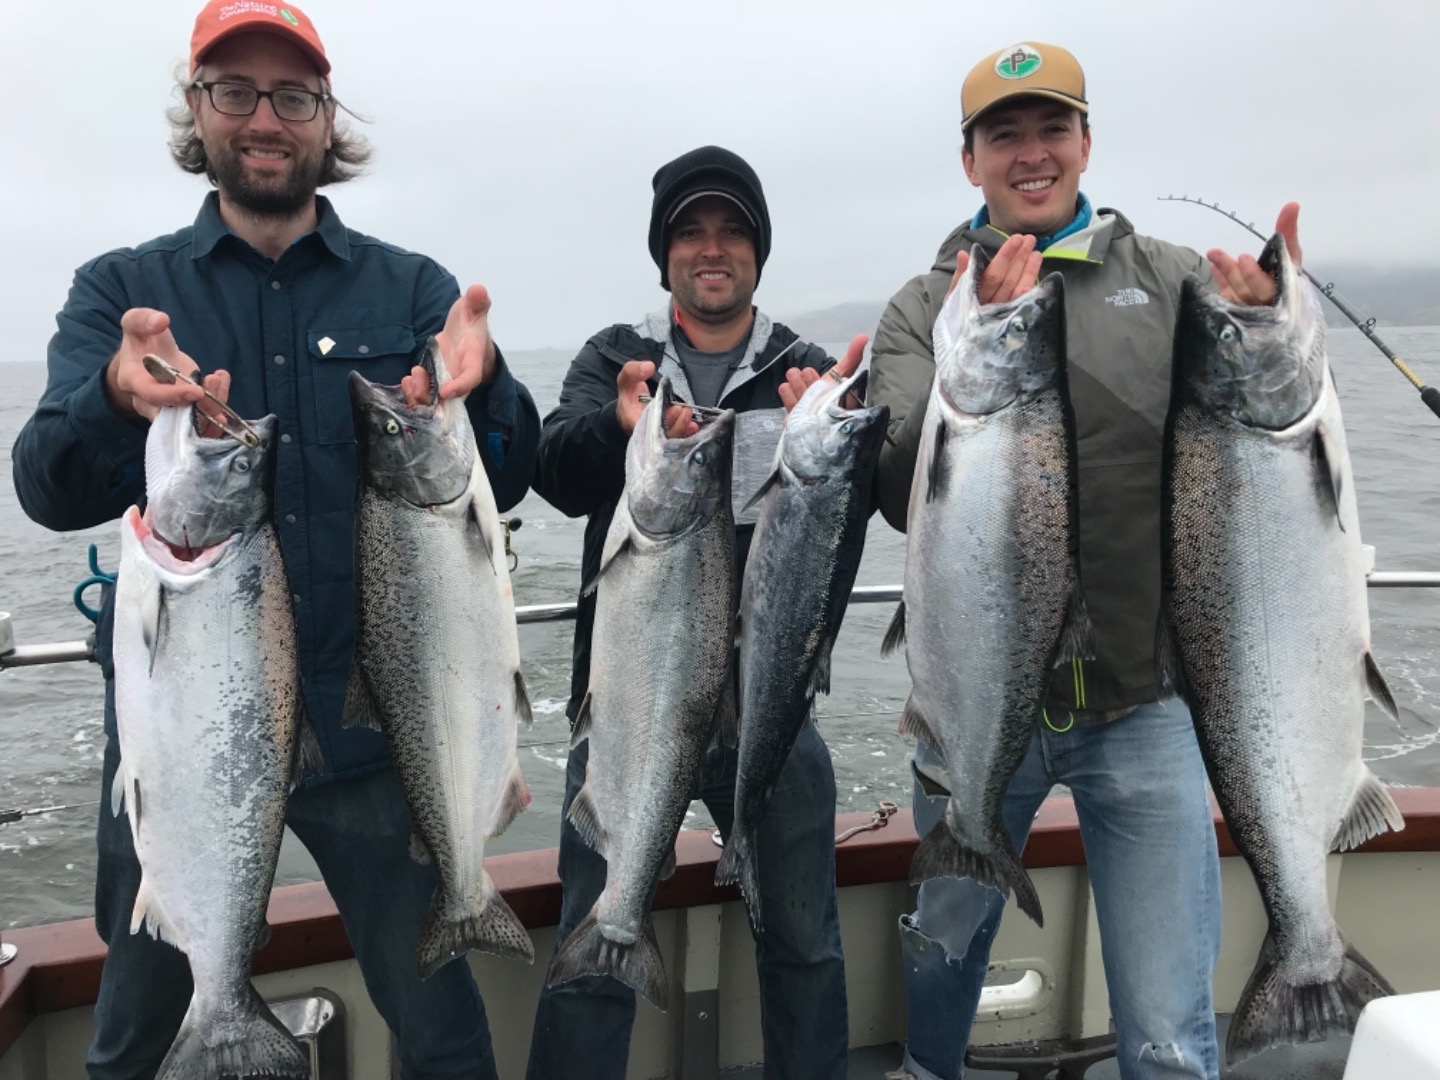 Solid salmon fishing for October!! 2 shy of limits!!